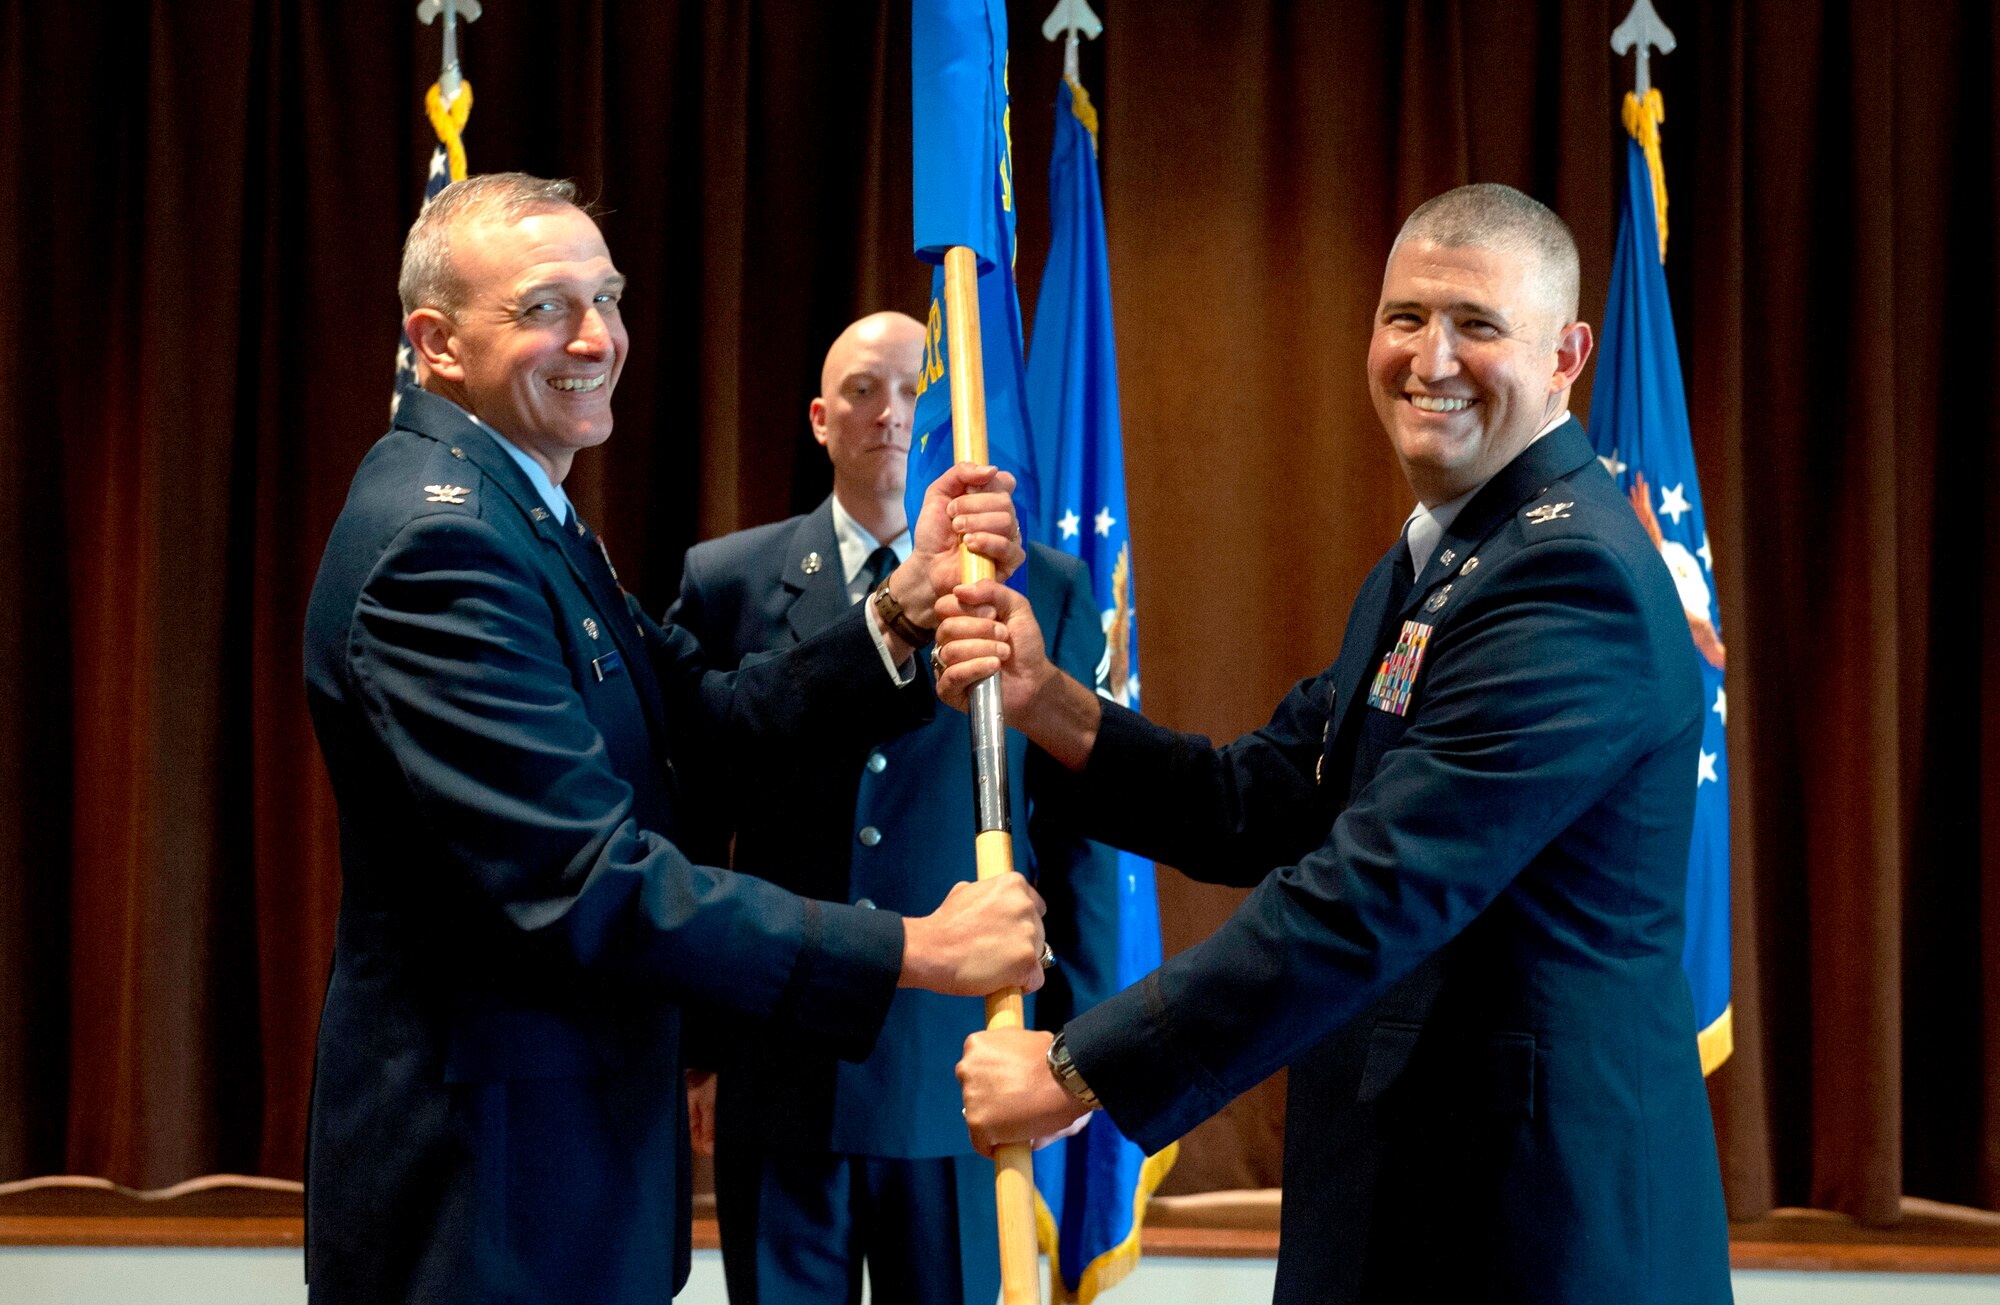 U.S. Air Force Col. Kenneth Stremmel takes command of the Global Exploitation Intelligence Group, National Air and Space Intelligence Center, Wright-Patterson Air Force Base, Ohio, July 14, 2021. The Global Exploitation Intelligence Group’s mission statement is: collect, exploit and analyze air, space, and cyberspace information to create integrated intelligence for NASIC and the Nation.